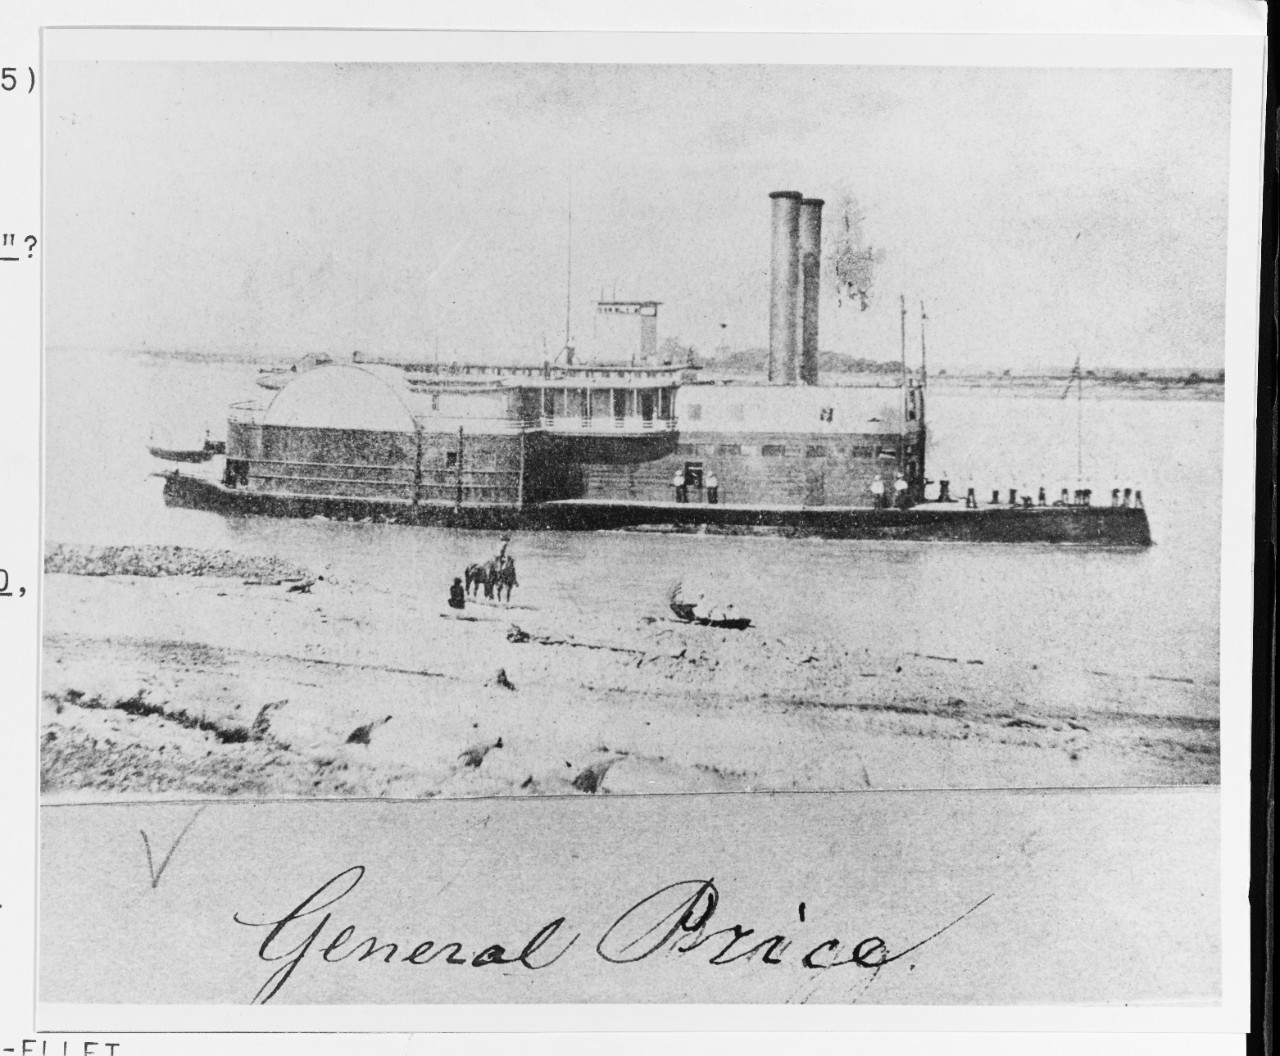 Photo #: NH 53868 Photograph of a Civil War Western Rivers ram steamer, one of the Ellet Rams. This view was originally identified as USS General Price, but differs from that ship in many basic features. Instead, this is most probably one of the Ellet fleet's side-wheel rams, which included: Switzerland, Queen of the West, Monarch, and Lancaster.